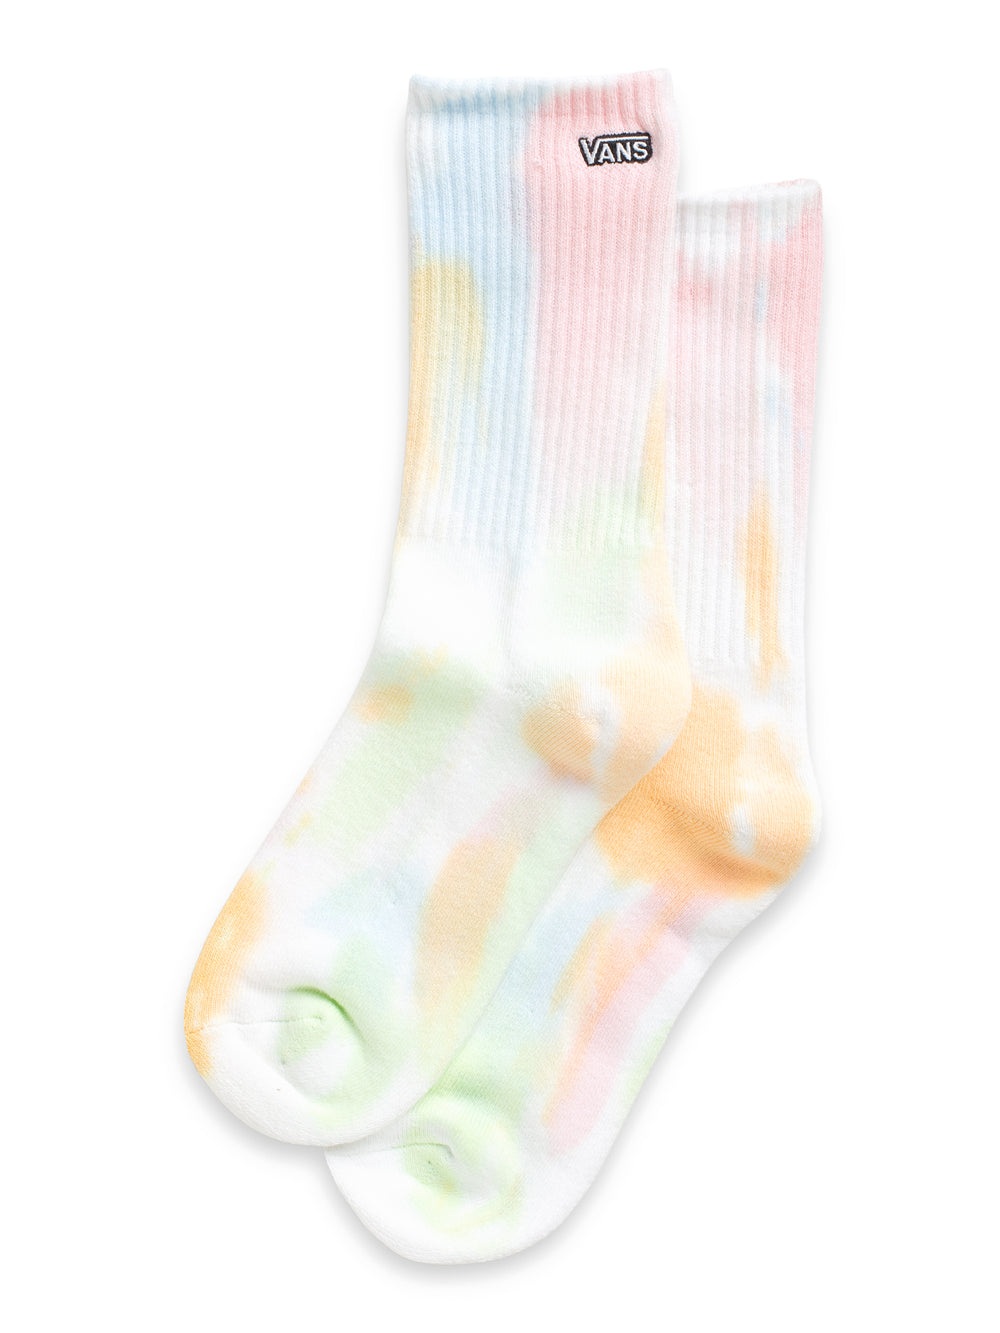 VANS TIE DYED CREW SOCKS - POPSICLE WASH - CLEARANCE